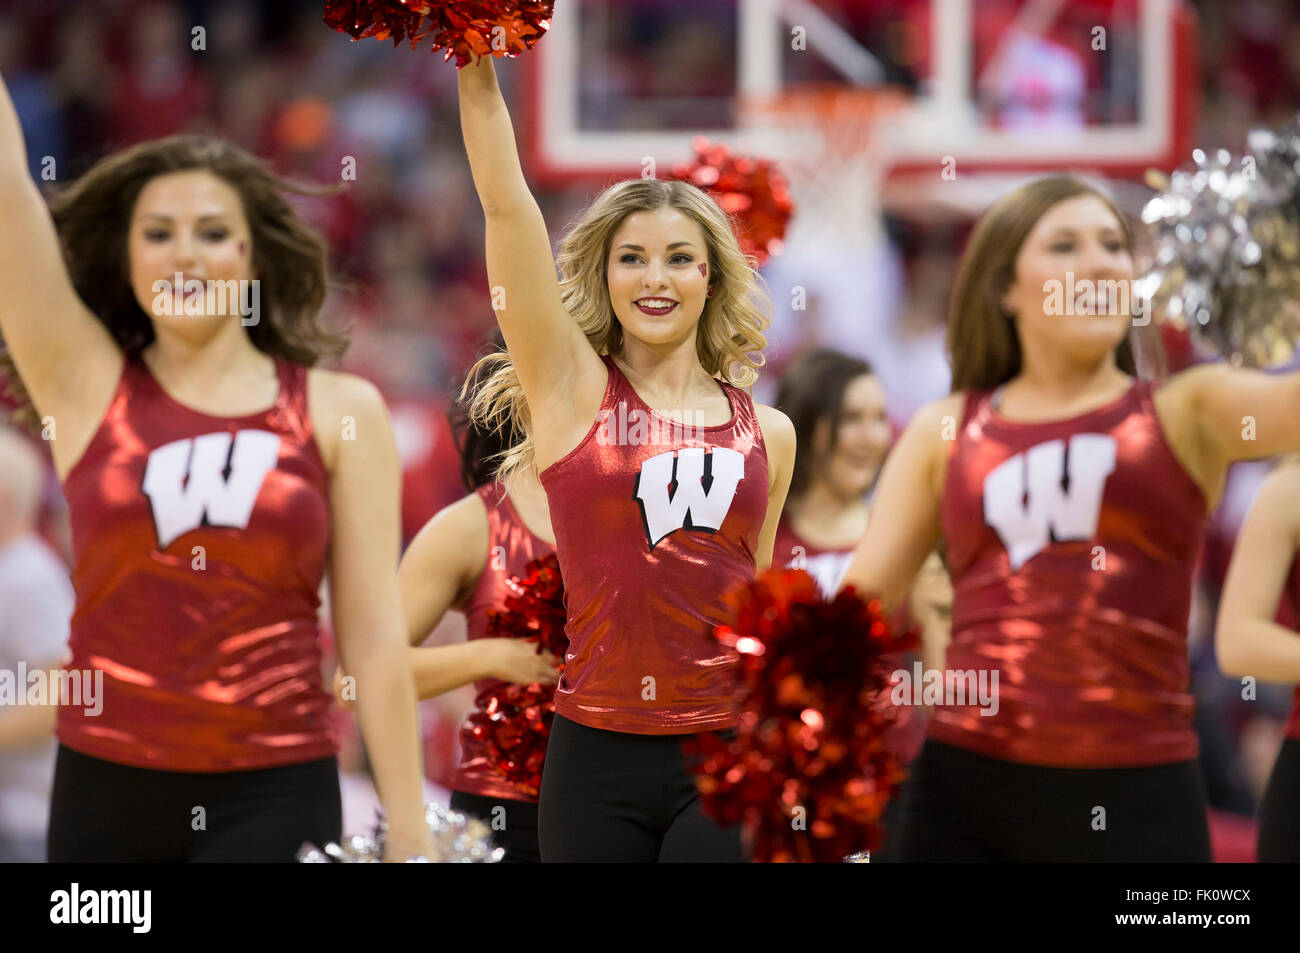 Madison, WI, USA. 28th Feb, 2016. Wisconsin Badgers cheerleaders entertain the crowd during the NCAA Basketball game between the Michigan Wolverines and the Wisconsin Badgers at the Kohl Center in Madison, WI. Wisconsin defeated Michigan 68-57. John Fisher/CSM/Alamy Live News Stock Photo